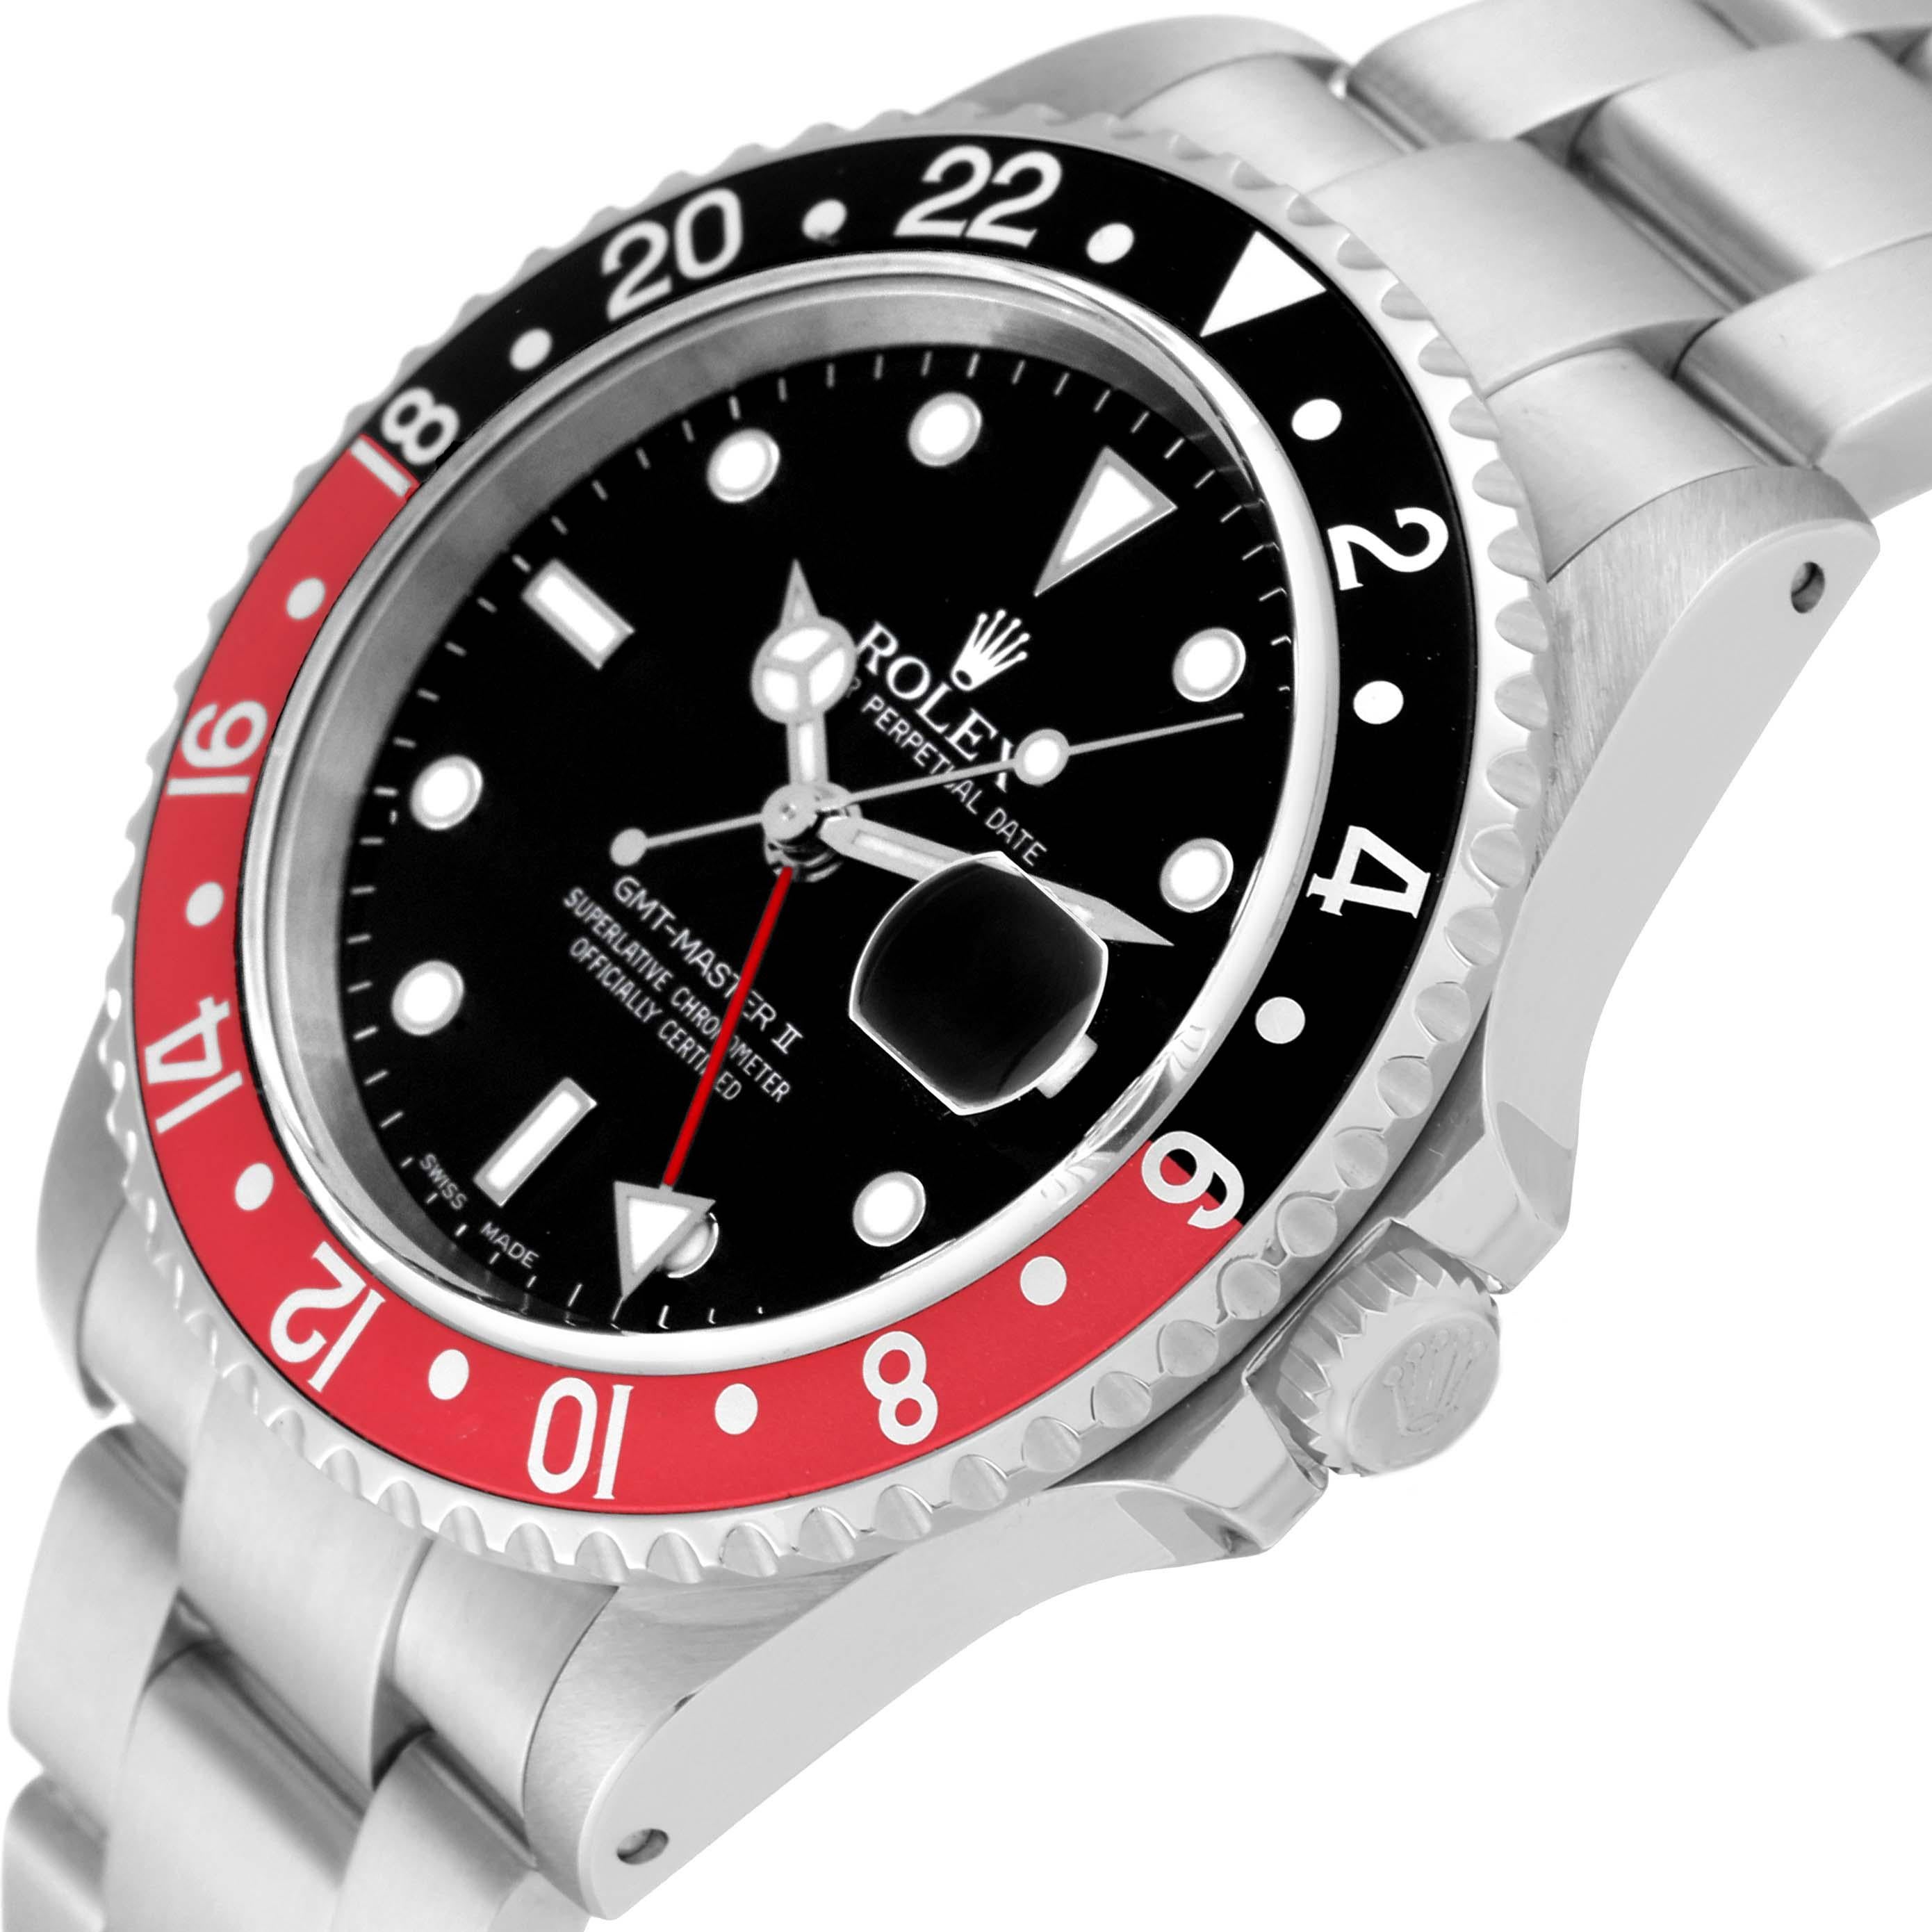 Rolex GMT Master II Black Red Coke Bezel Steel Mens Watch 16710. Officially certified chronometer automatic self-winding movement. Stainless steel case 40 mm in diameter. Rolex logo on the crown. Stainless steel bi-directional rotating bezel with a